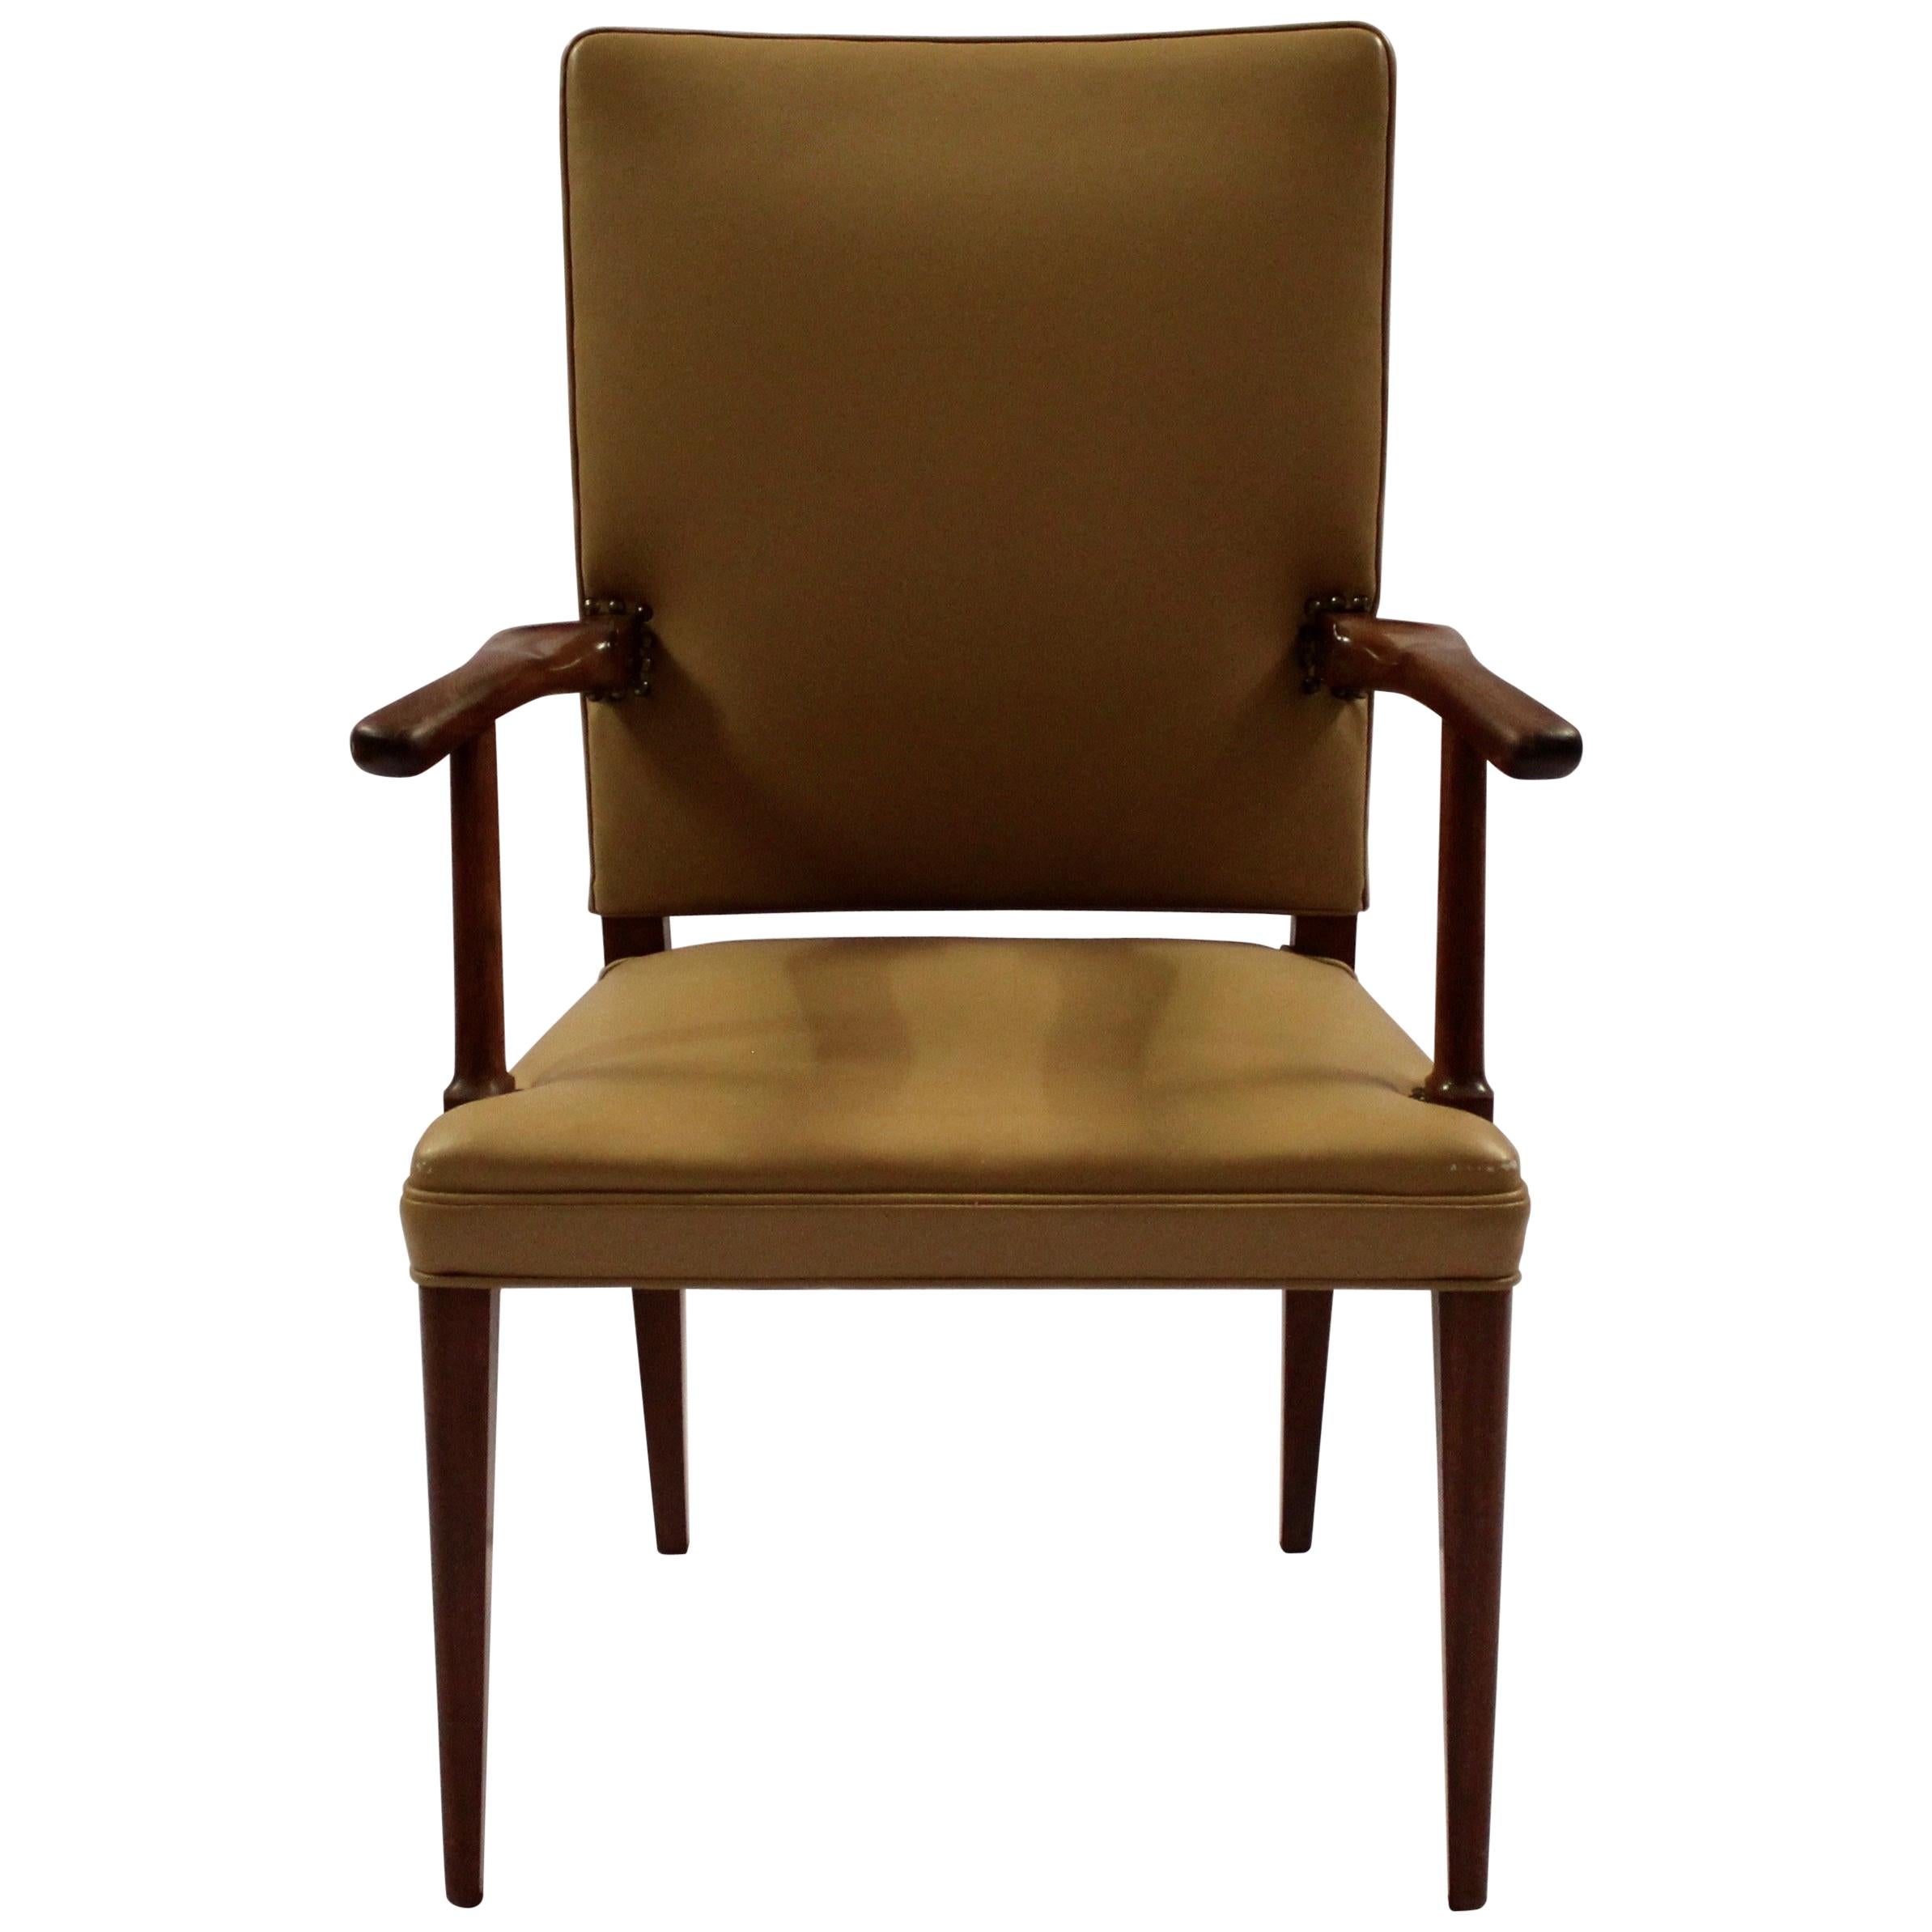 Armchair in Mahogany and Light Leather by Jacob Kjær from the 1950s For Sale